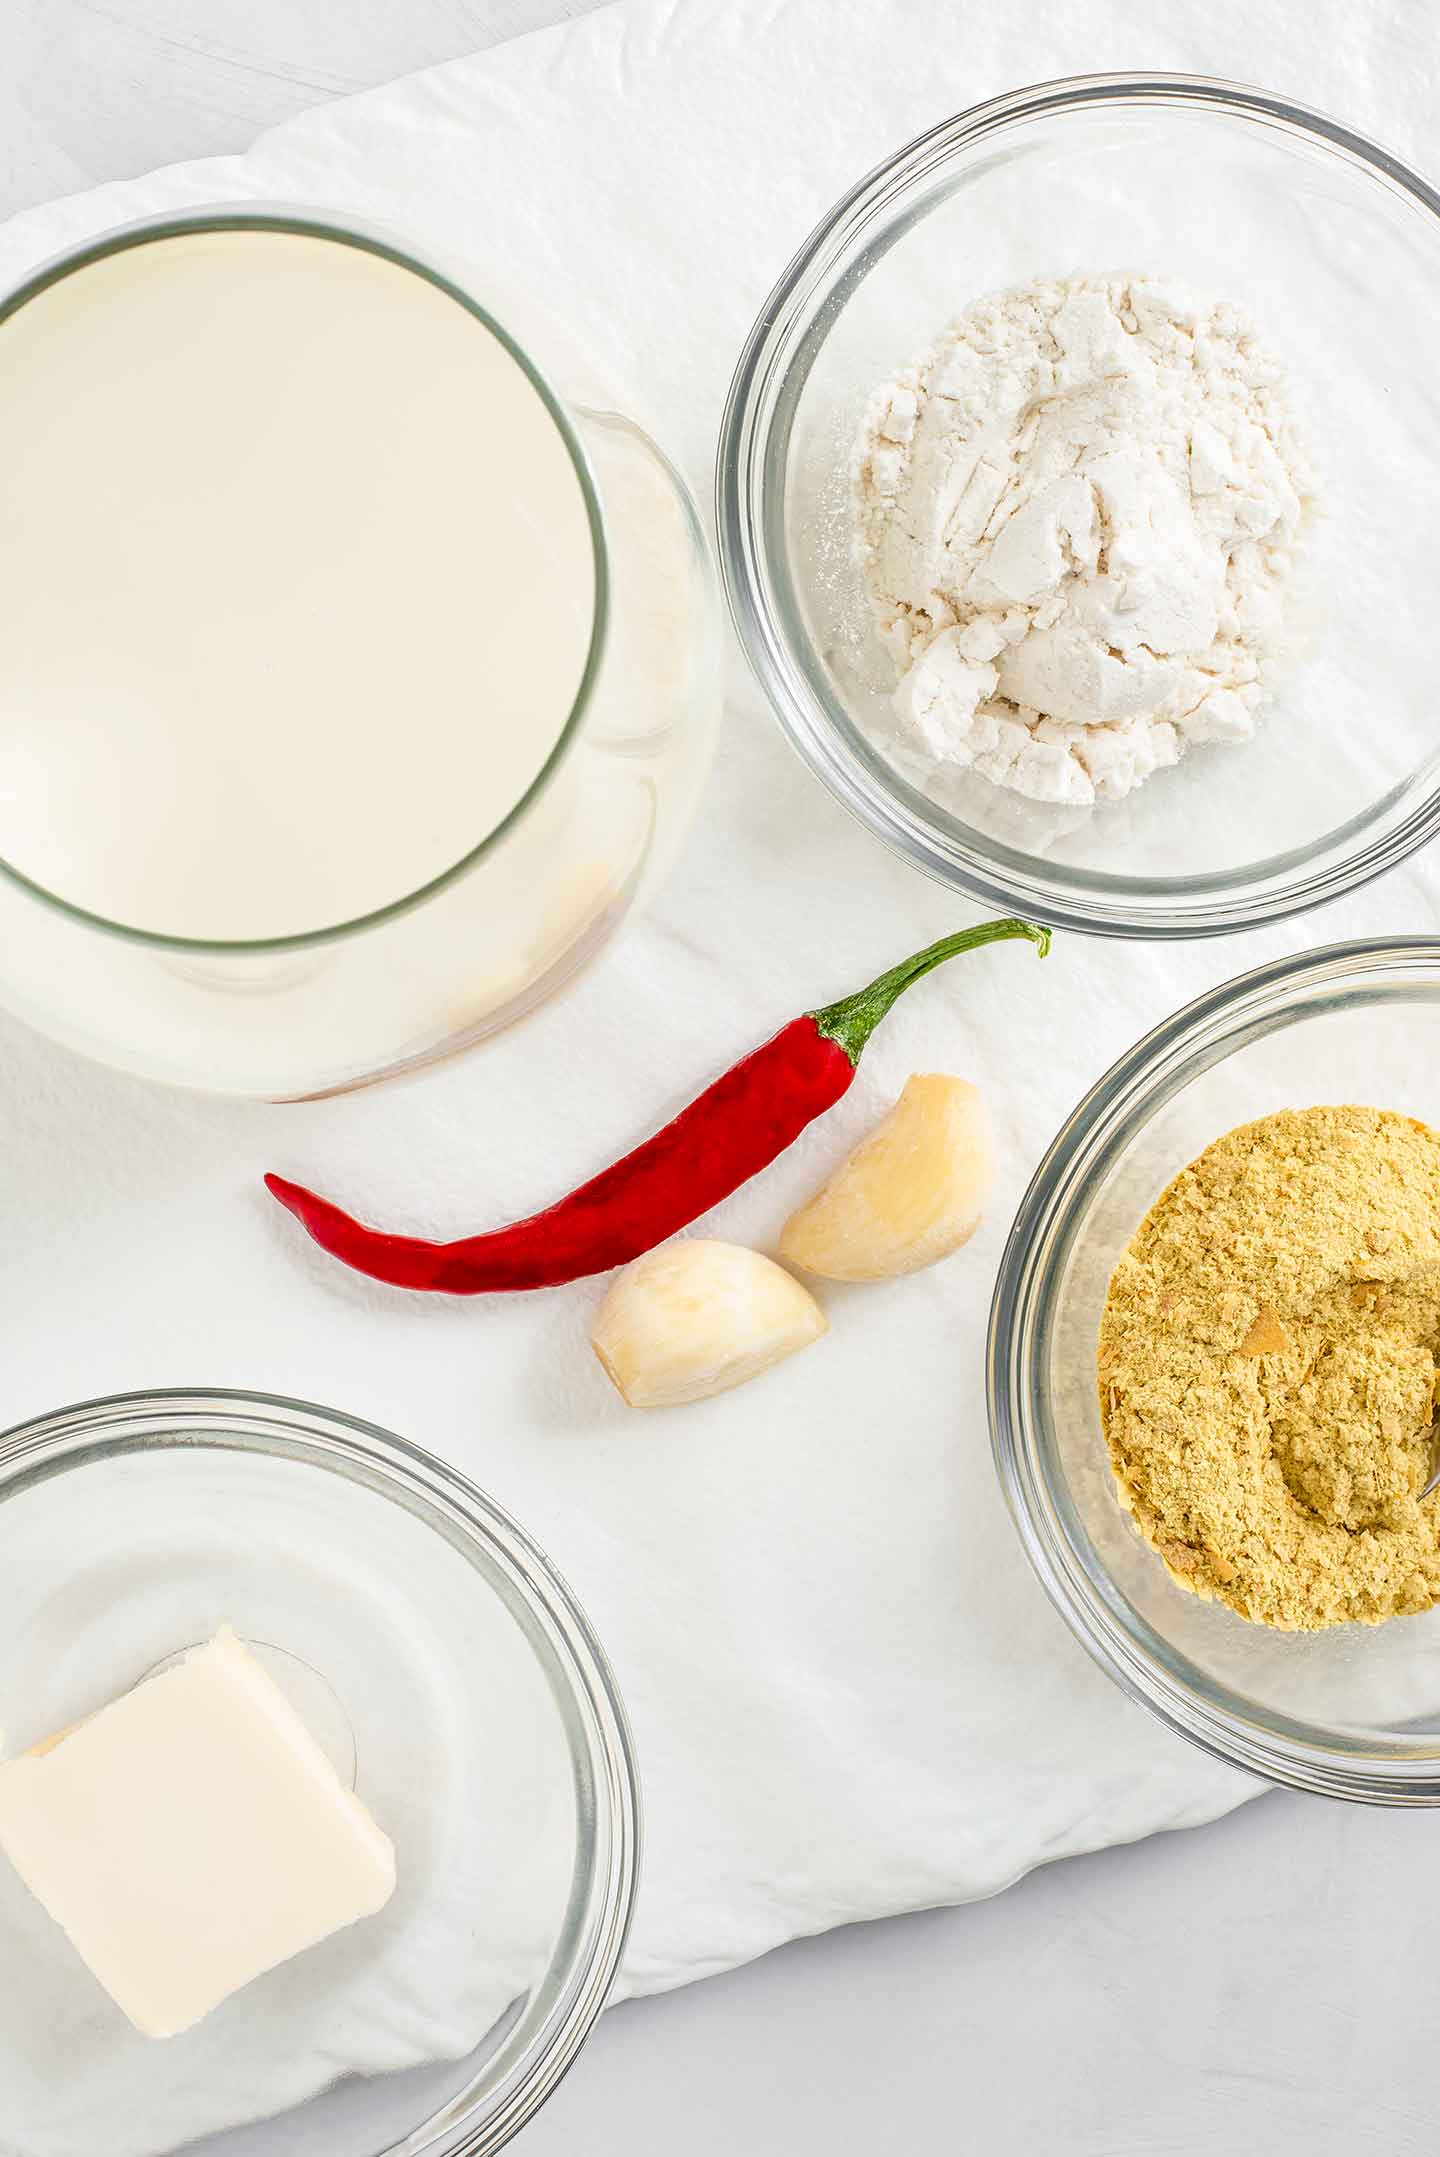 Top down view of queso ingredients. A glass of milk, a small bowl of flour, nutritional yeast, butter, garlic cloves and a hot red chilli pepper.